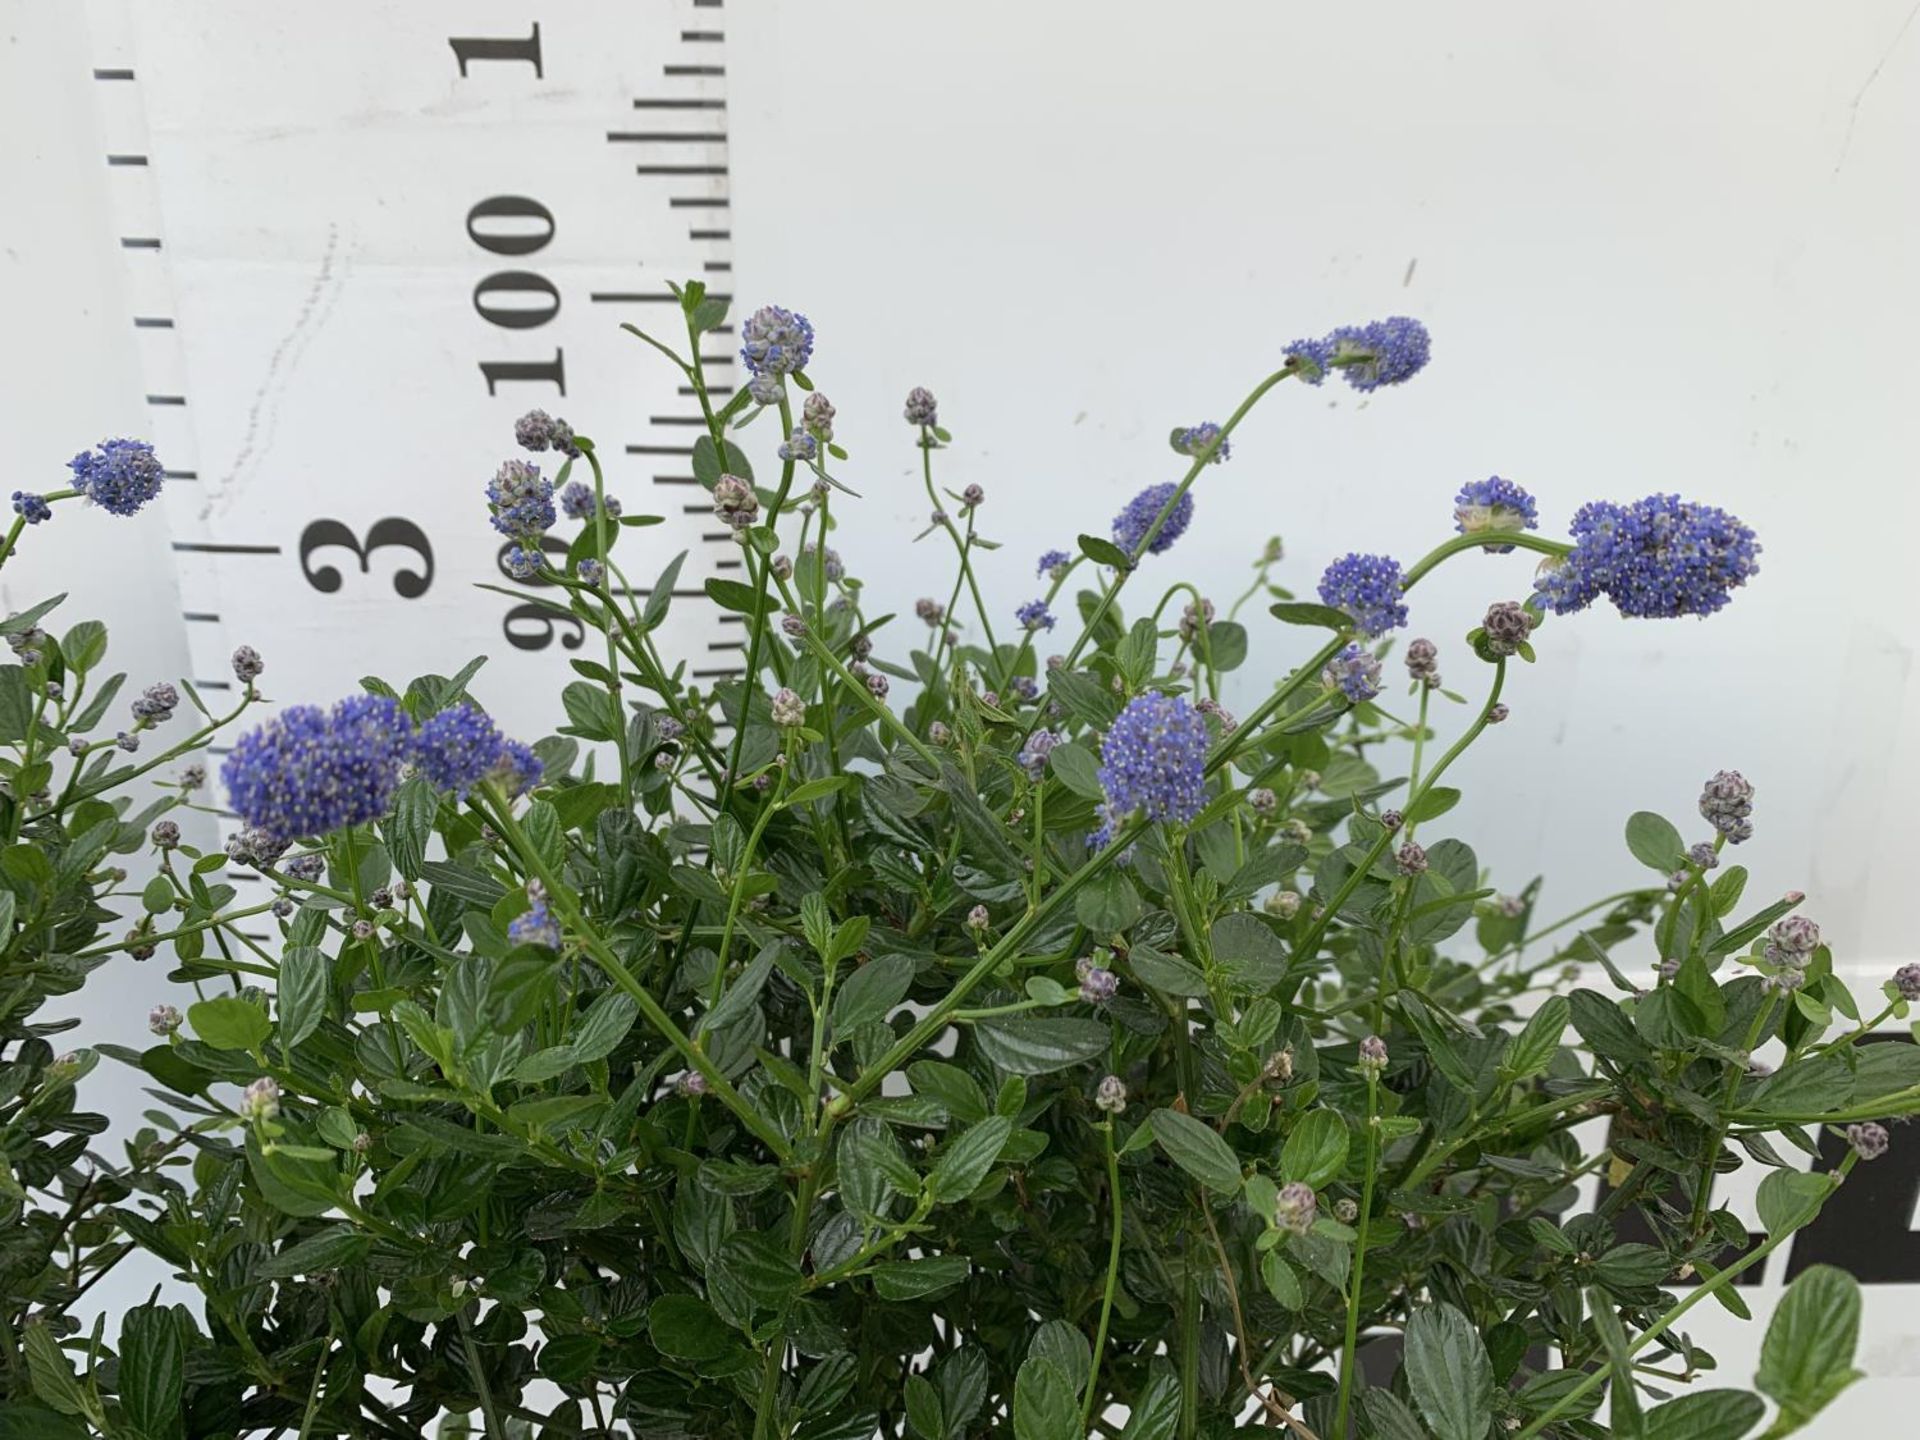 TWO CEANOTHUS IMPRESSUS STANDARD TREES 'VICTORIA' IN FLOWER APPROX 110CM IN HEIGHT IN 3LTR POTS PLUS - Image 5 of 10